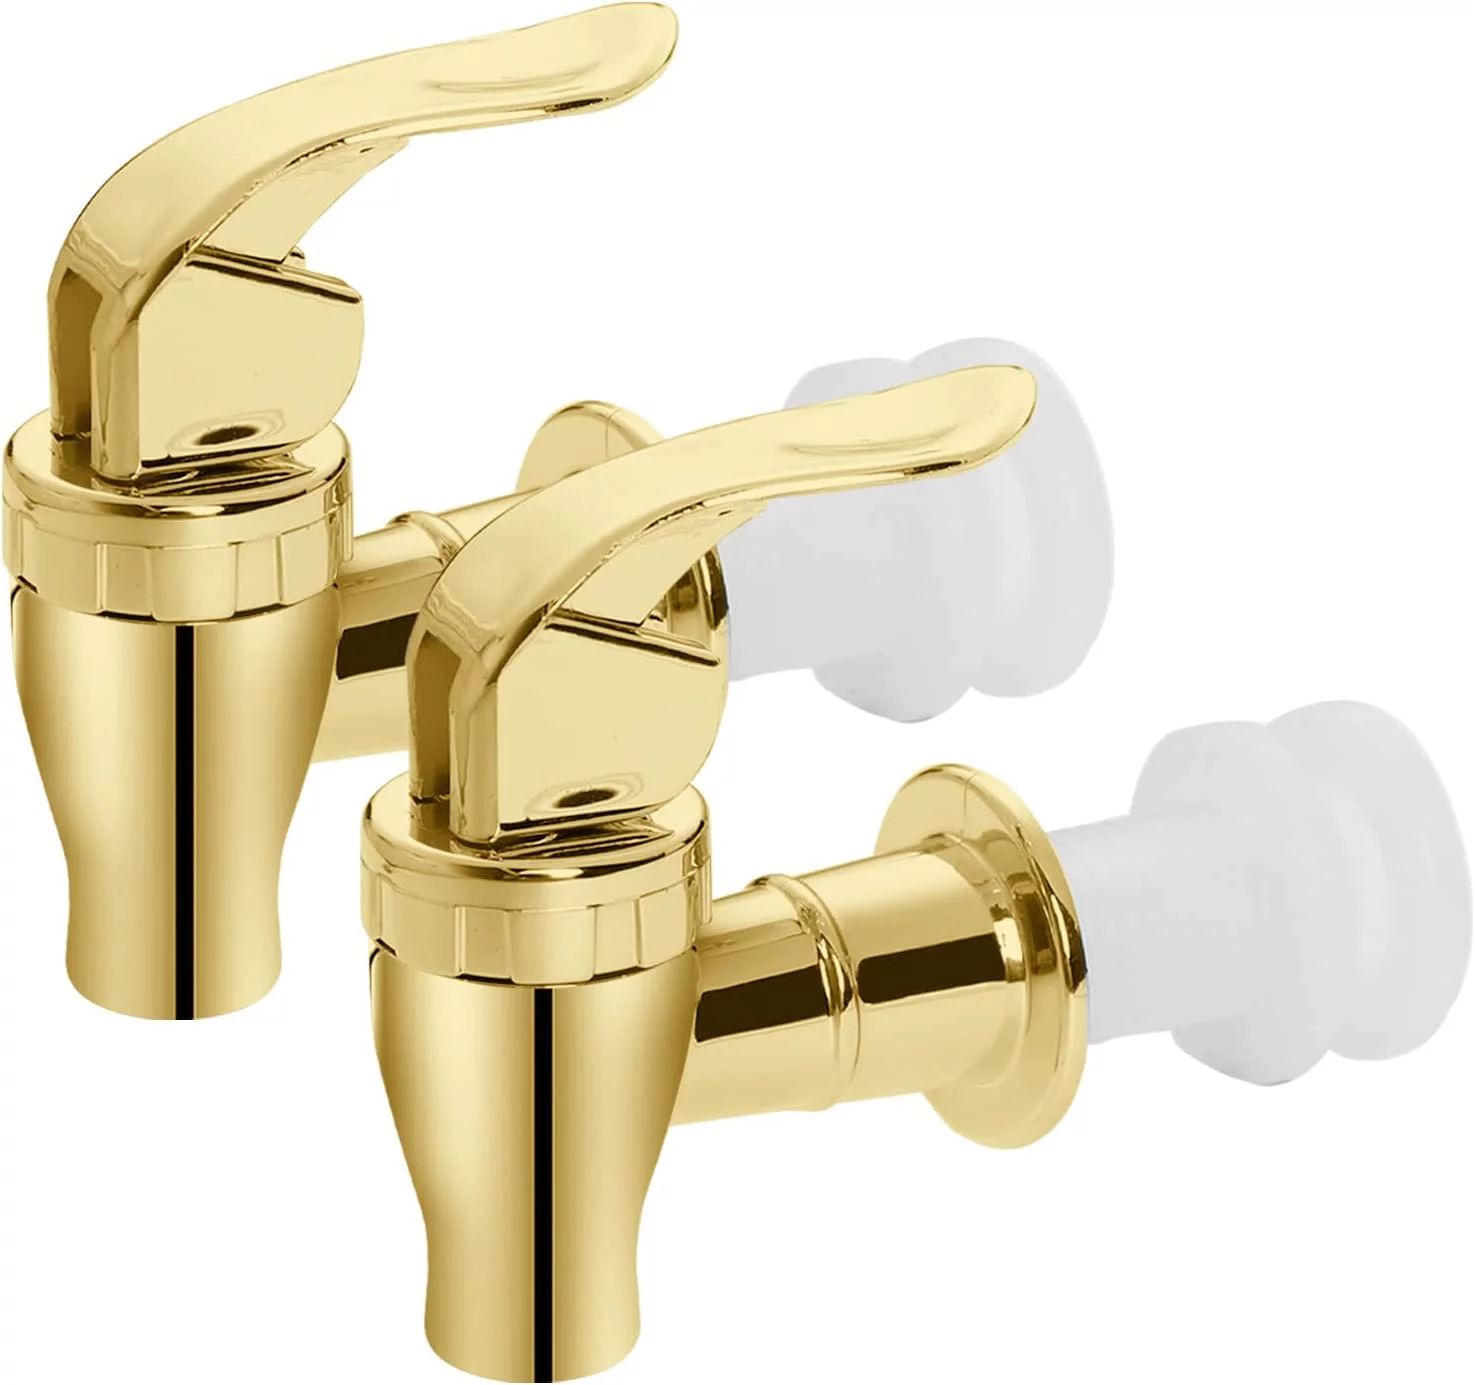 2 Pack Gold Push Style Spigot for Beverage Dispenser, Replacement Faucet for Glass Water Dispense... | Walmart (US)